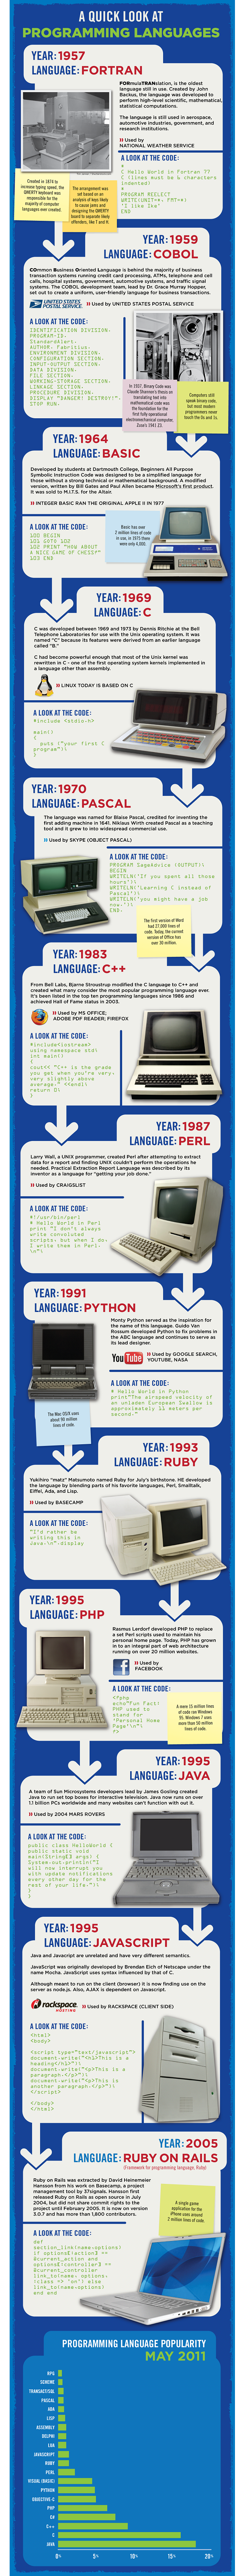 The Evolution of Languages